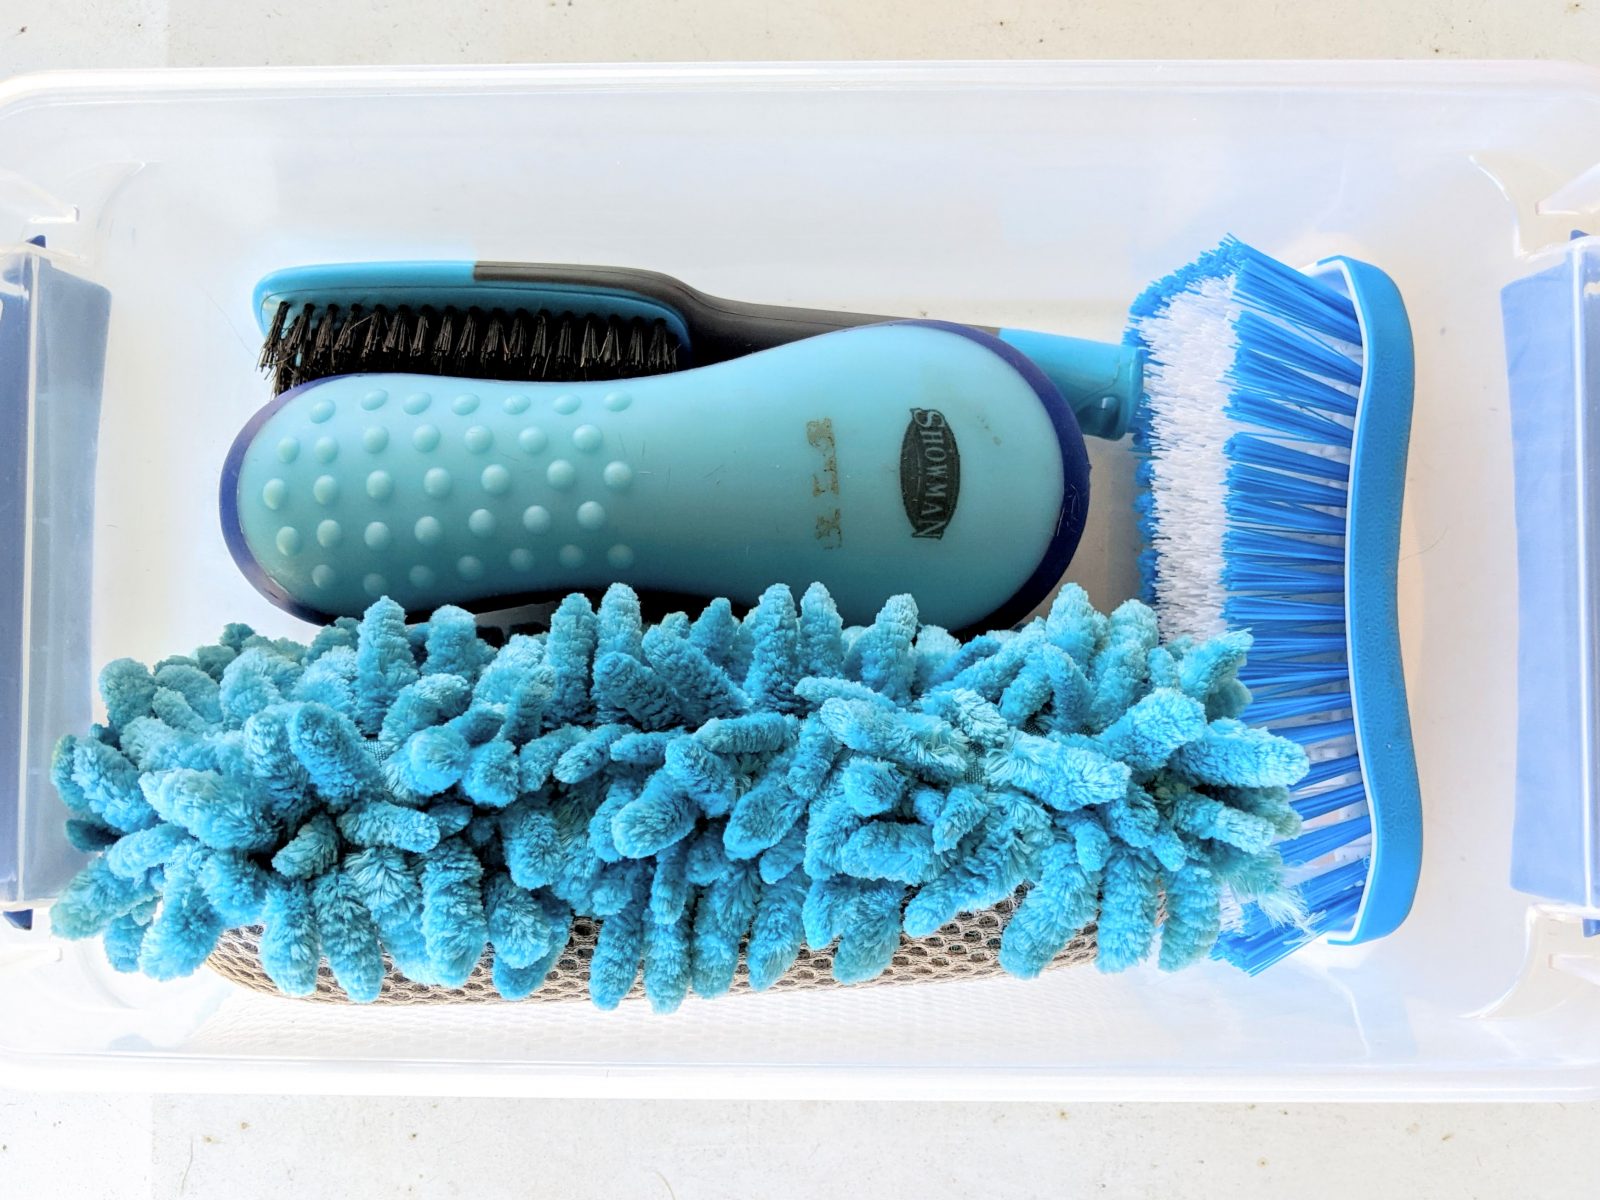 blue brushes and sponges in plastic box